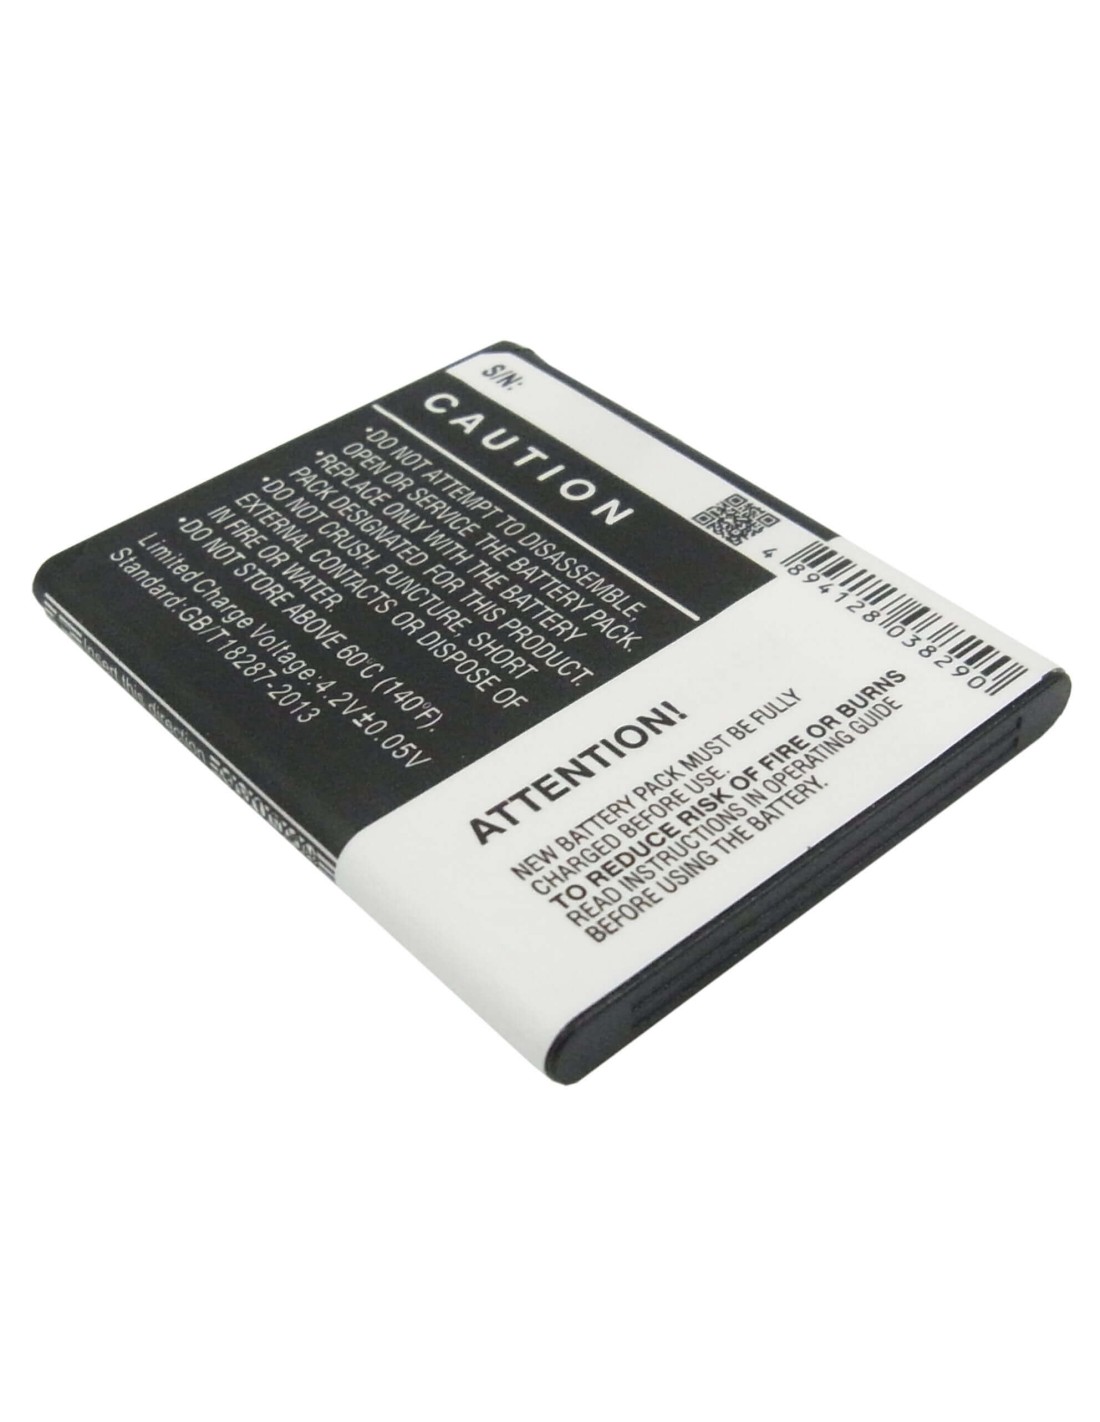 Battery for Huawei U8150, IDEOS, C8500 3.7V, 1100mAh - 4.07Wh